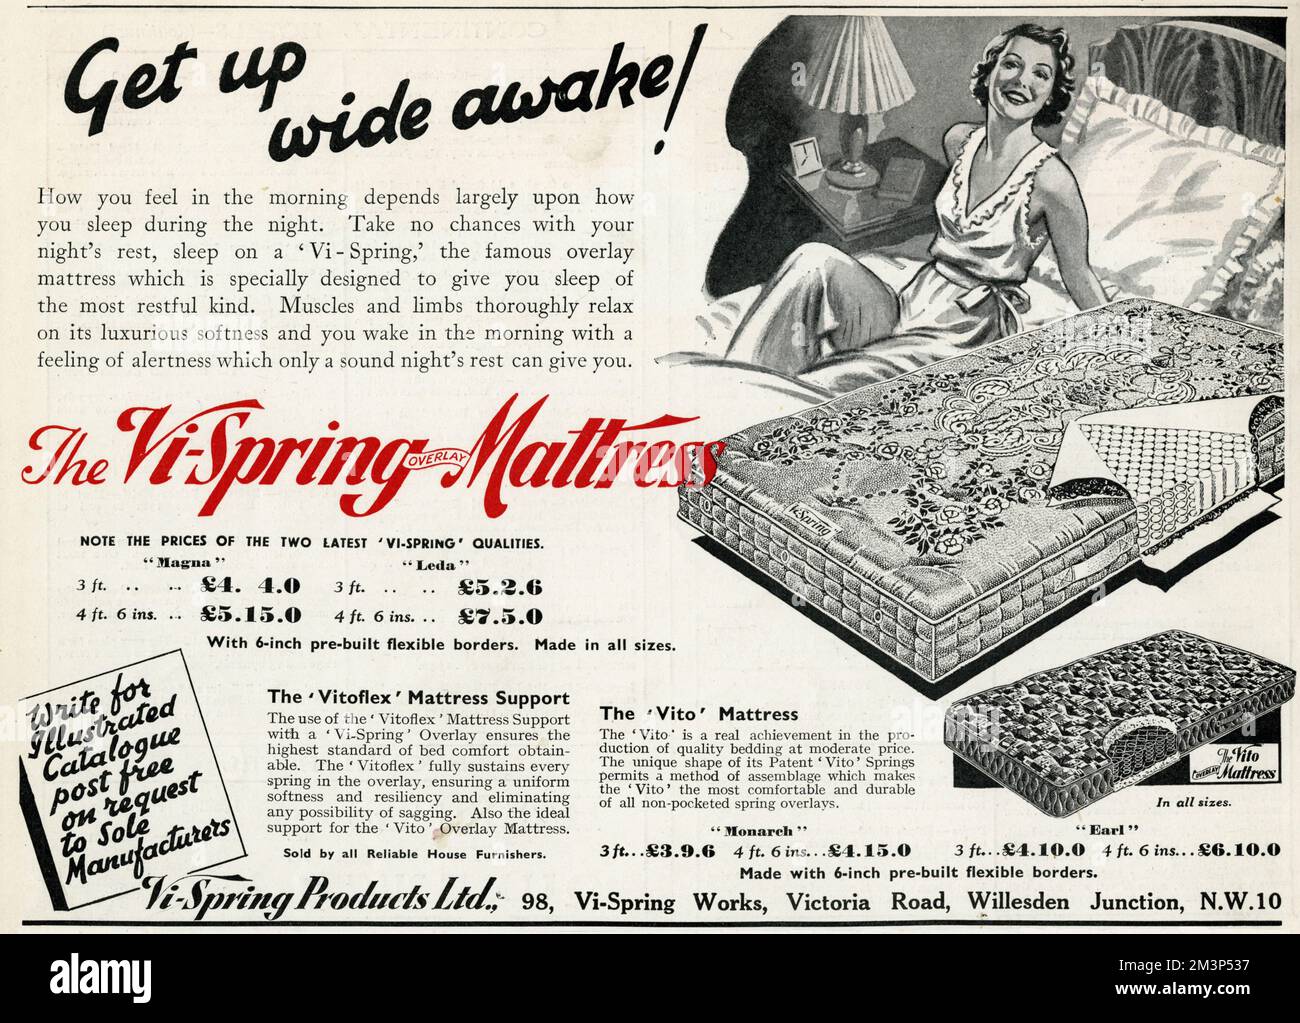 'Get up wide awake'!  How you feel in the morning depends largely upon how you sleep during the night.  Take no chances with your night's rest, sleep on a 'Vi-Spring', the famous overlay mattress which is specially designed to give you sleep of most restful kind.     Date: 1939 Stock Photo